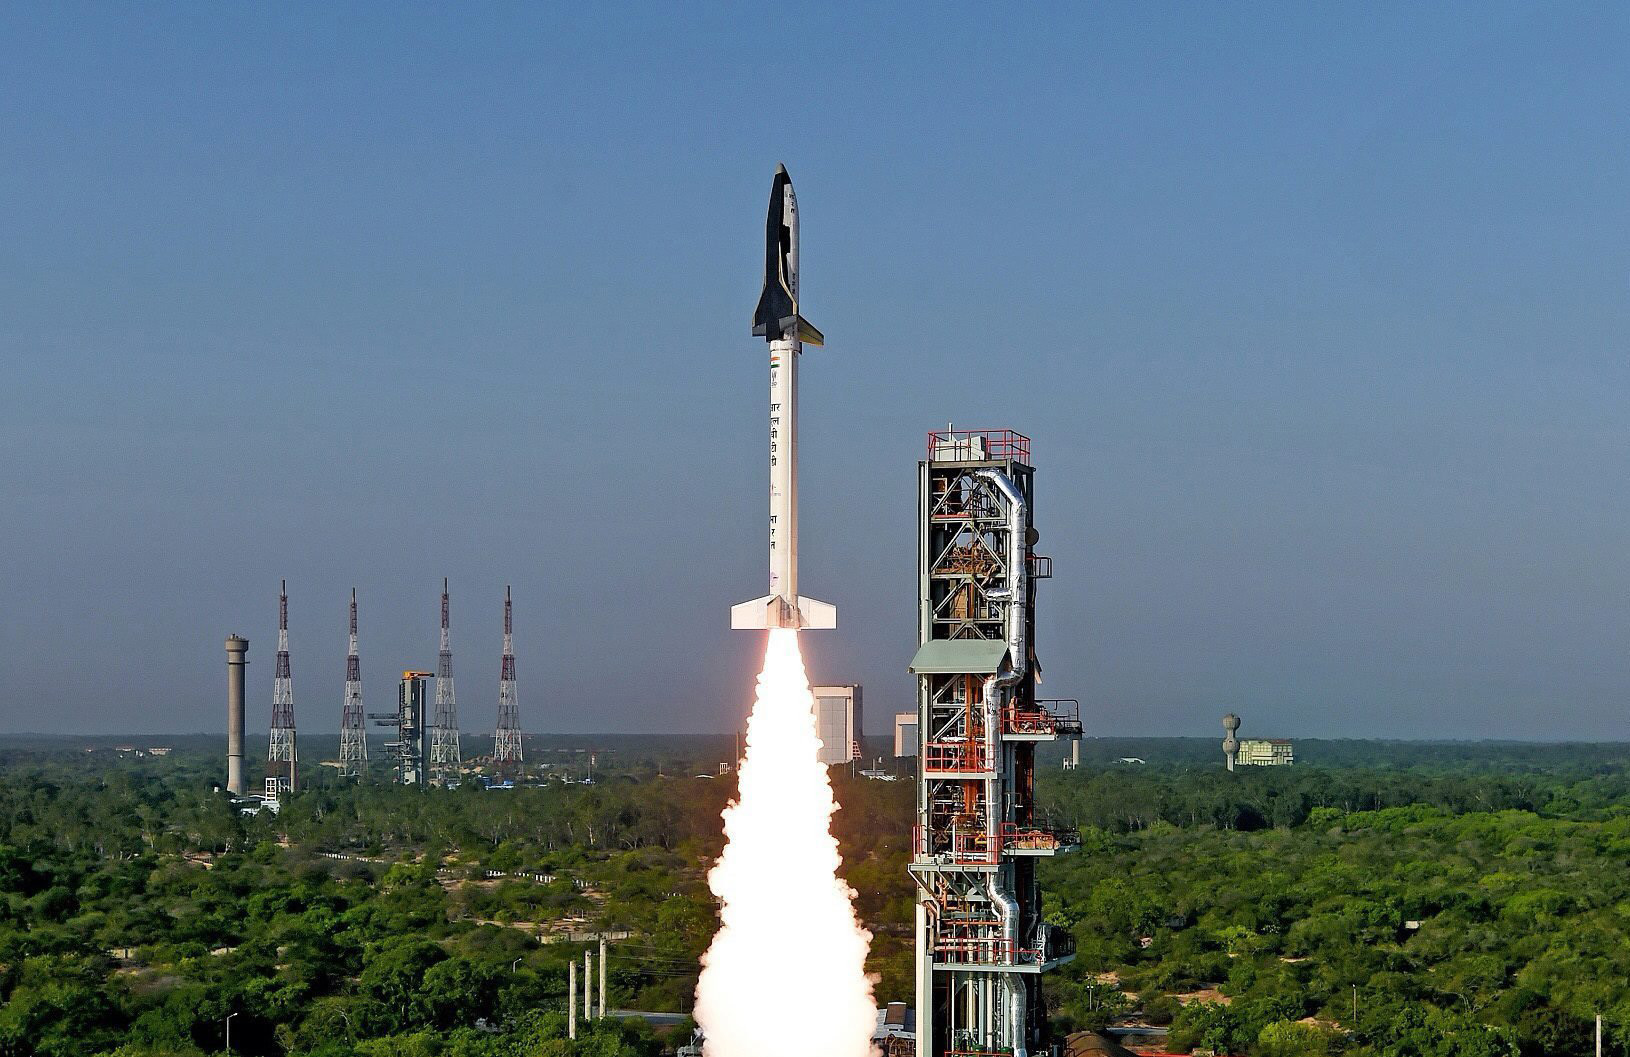 India's Reusable Launch Vehicle (RLV)-TD taking off from Sriharikota, Andhra Pradesh, May 23, 2016. (Indian Space Research Organization/EPA)